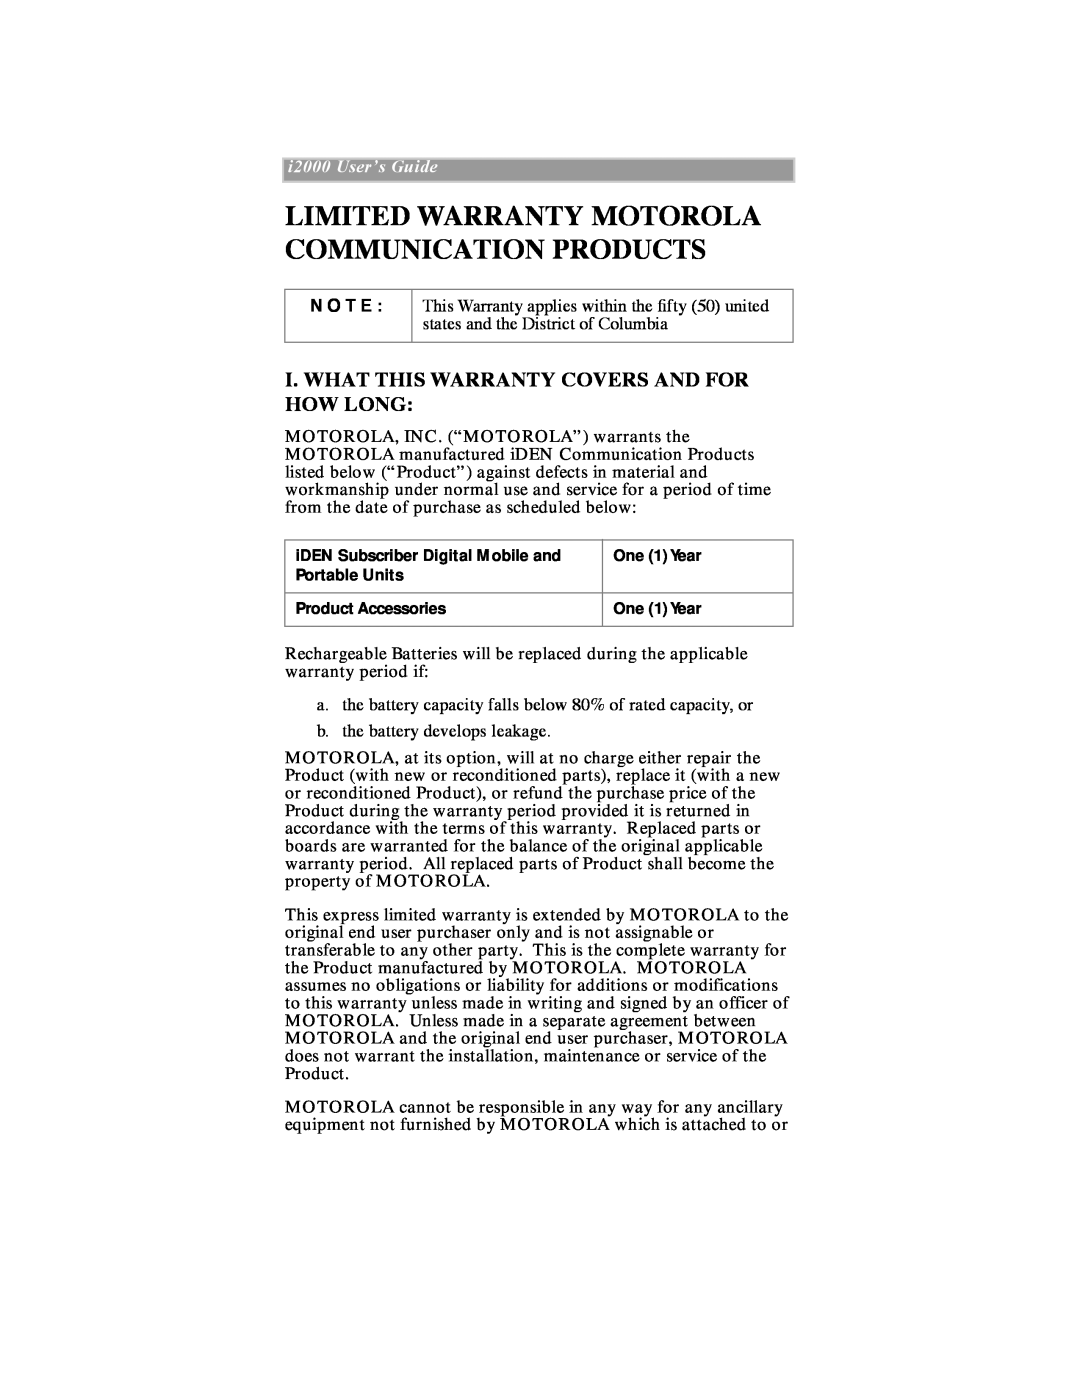 Motorola iDEN Limited Warranty Motorola Communication Products, I. What This Warranty Covers And For How Long, N O T E 